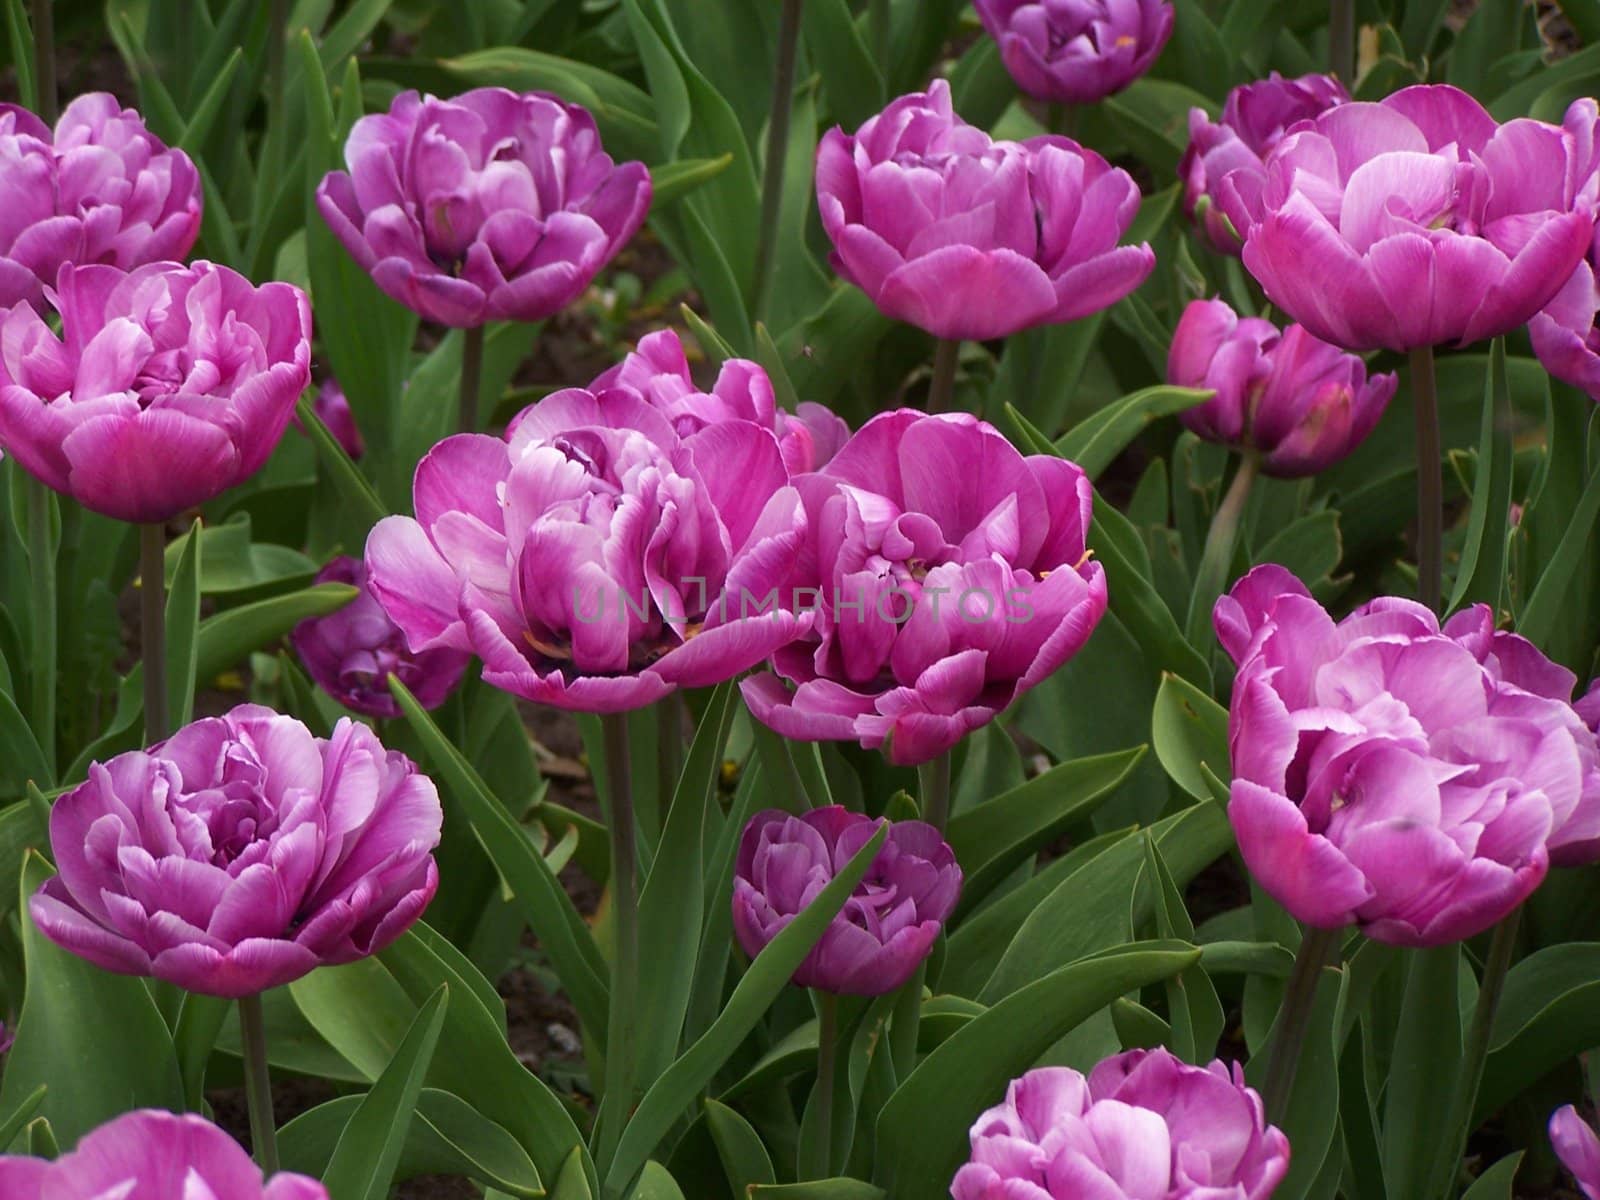 Many purple tulips. Green leaves. Close up.